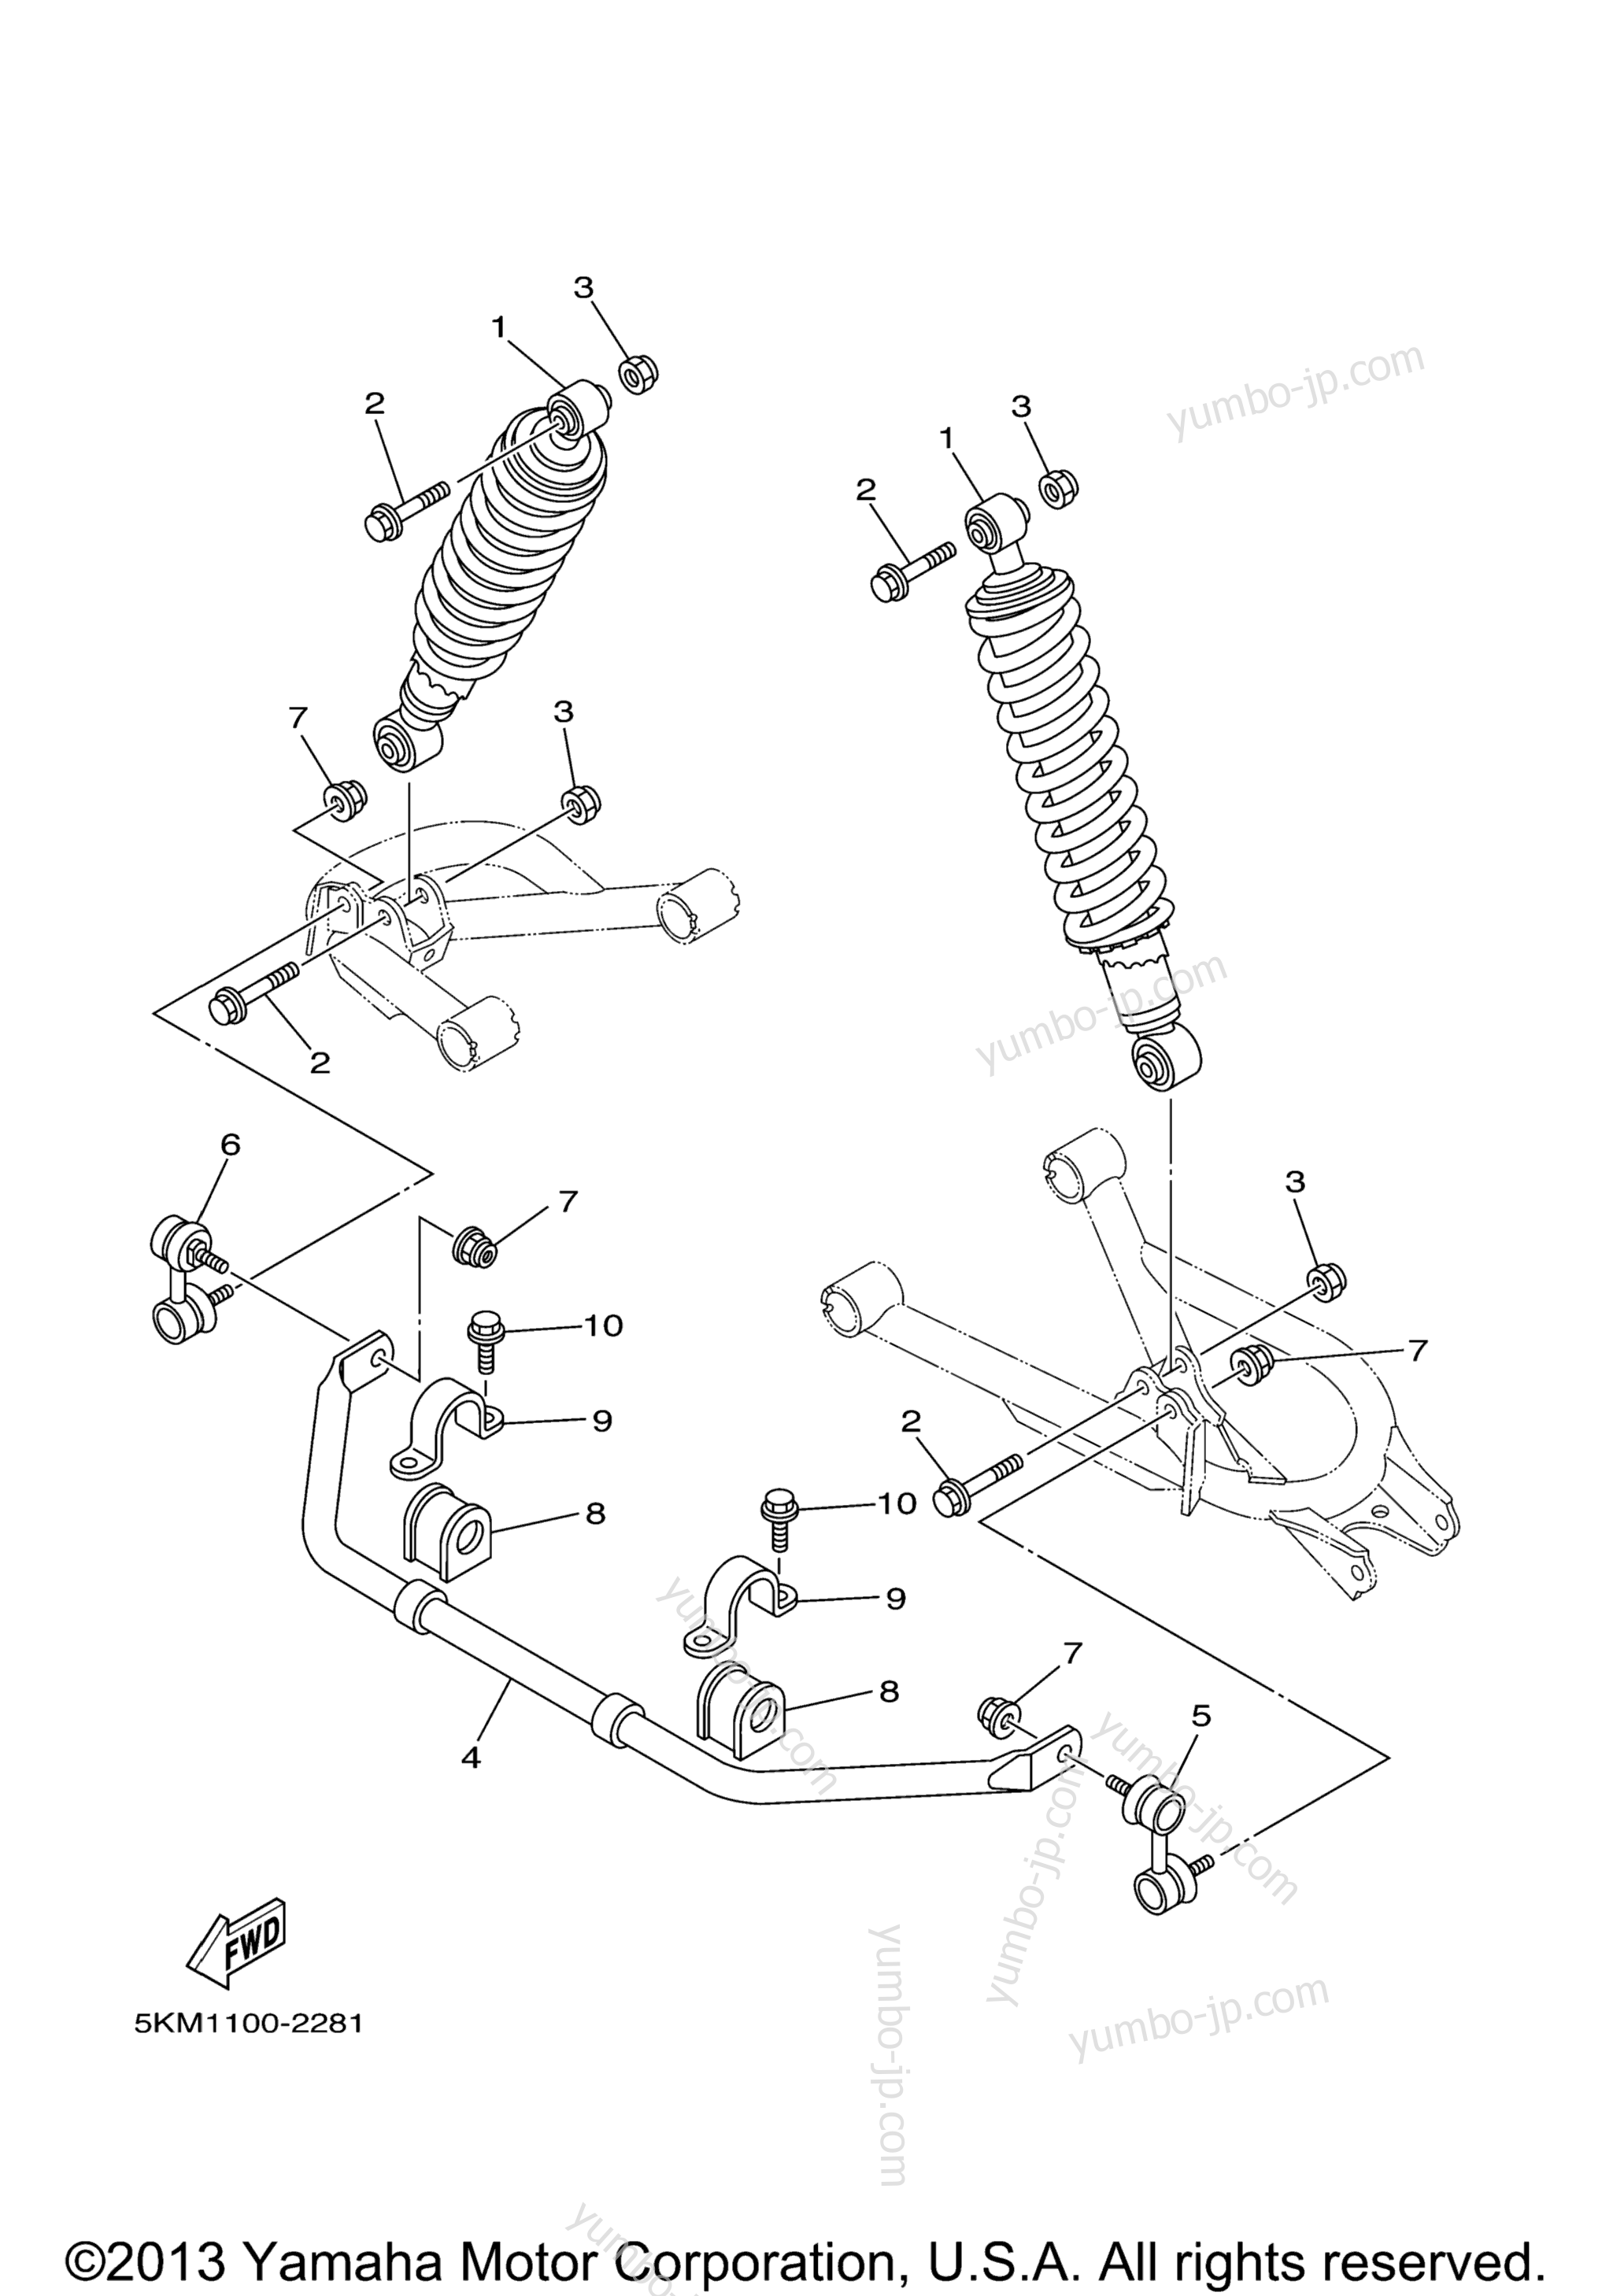 Rear Suspension for ATVs YAMAHA GRIZZLY 660 DUCKS UNLIMITED EDITION (YFM66FAHDV) 2006 year